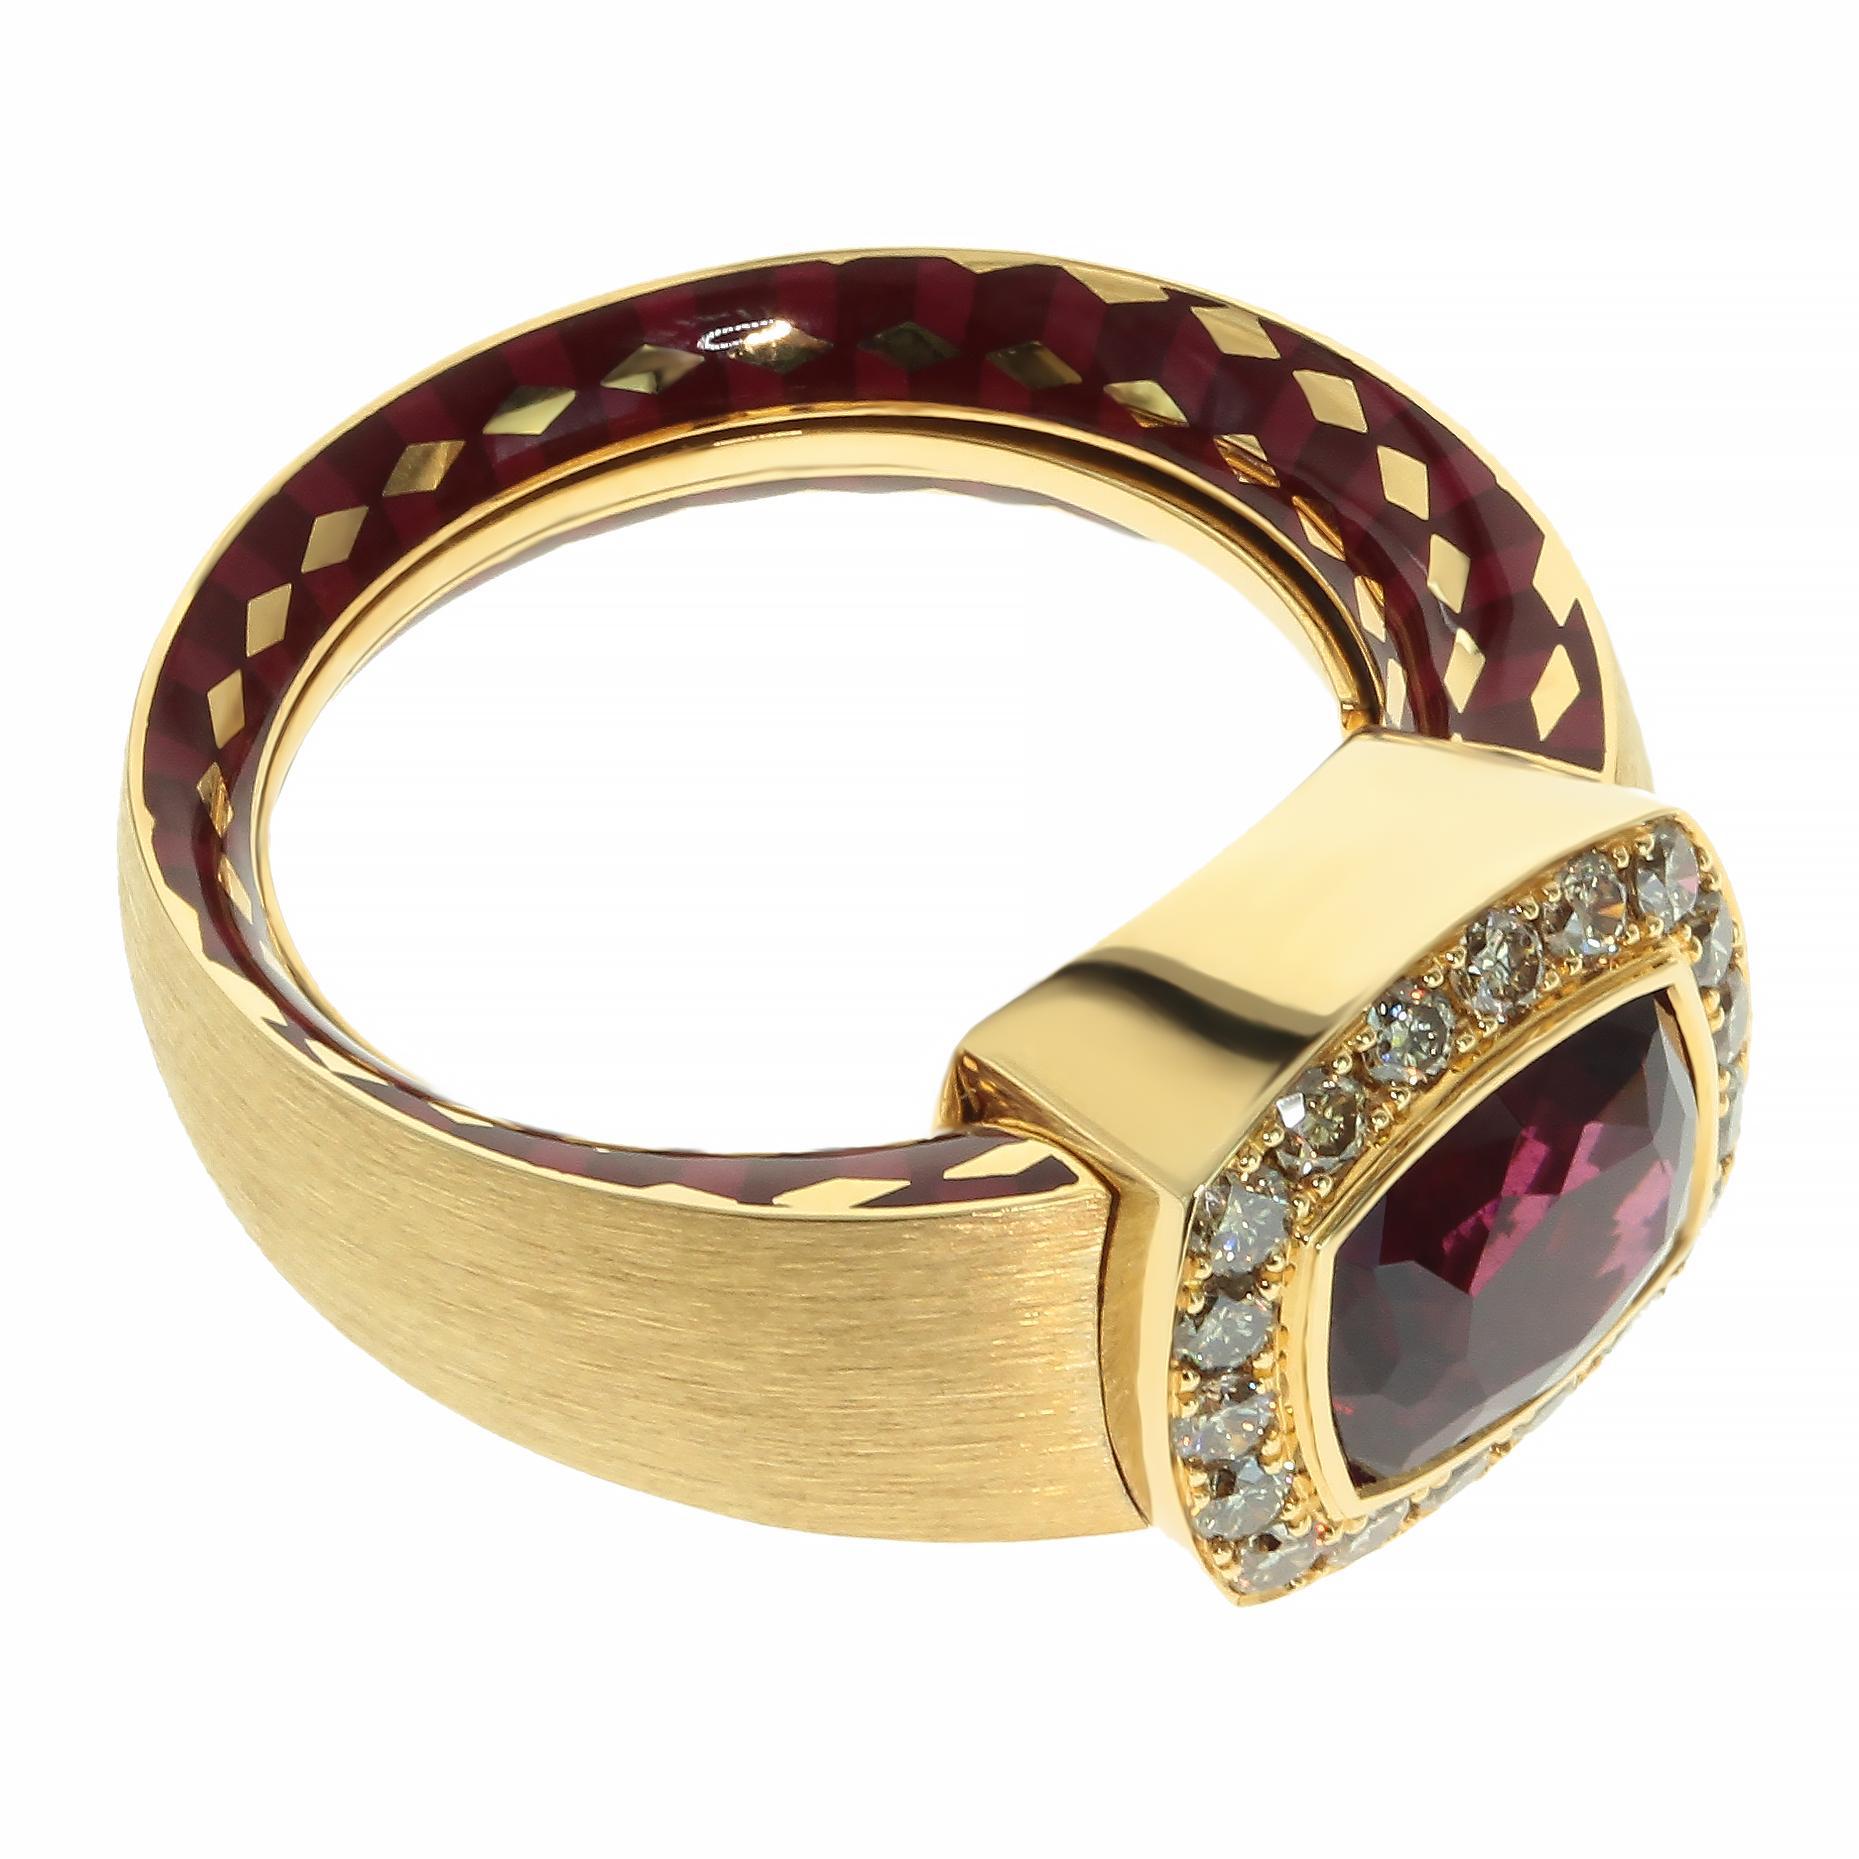 Rhodolite Garnet Diamonds 18 Karat Yellow Gold Male Enamel Ring

Our worldwide famous Kaleidoscope collection. Male version is out now.
For Men who are tired of boring ordinary things. Be different. Be brighter than others.
Accompanied by the